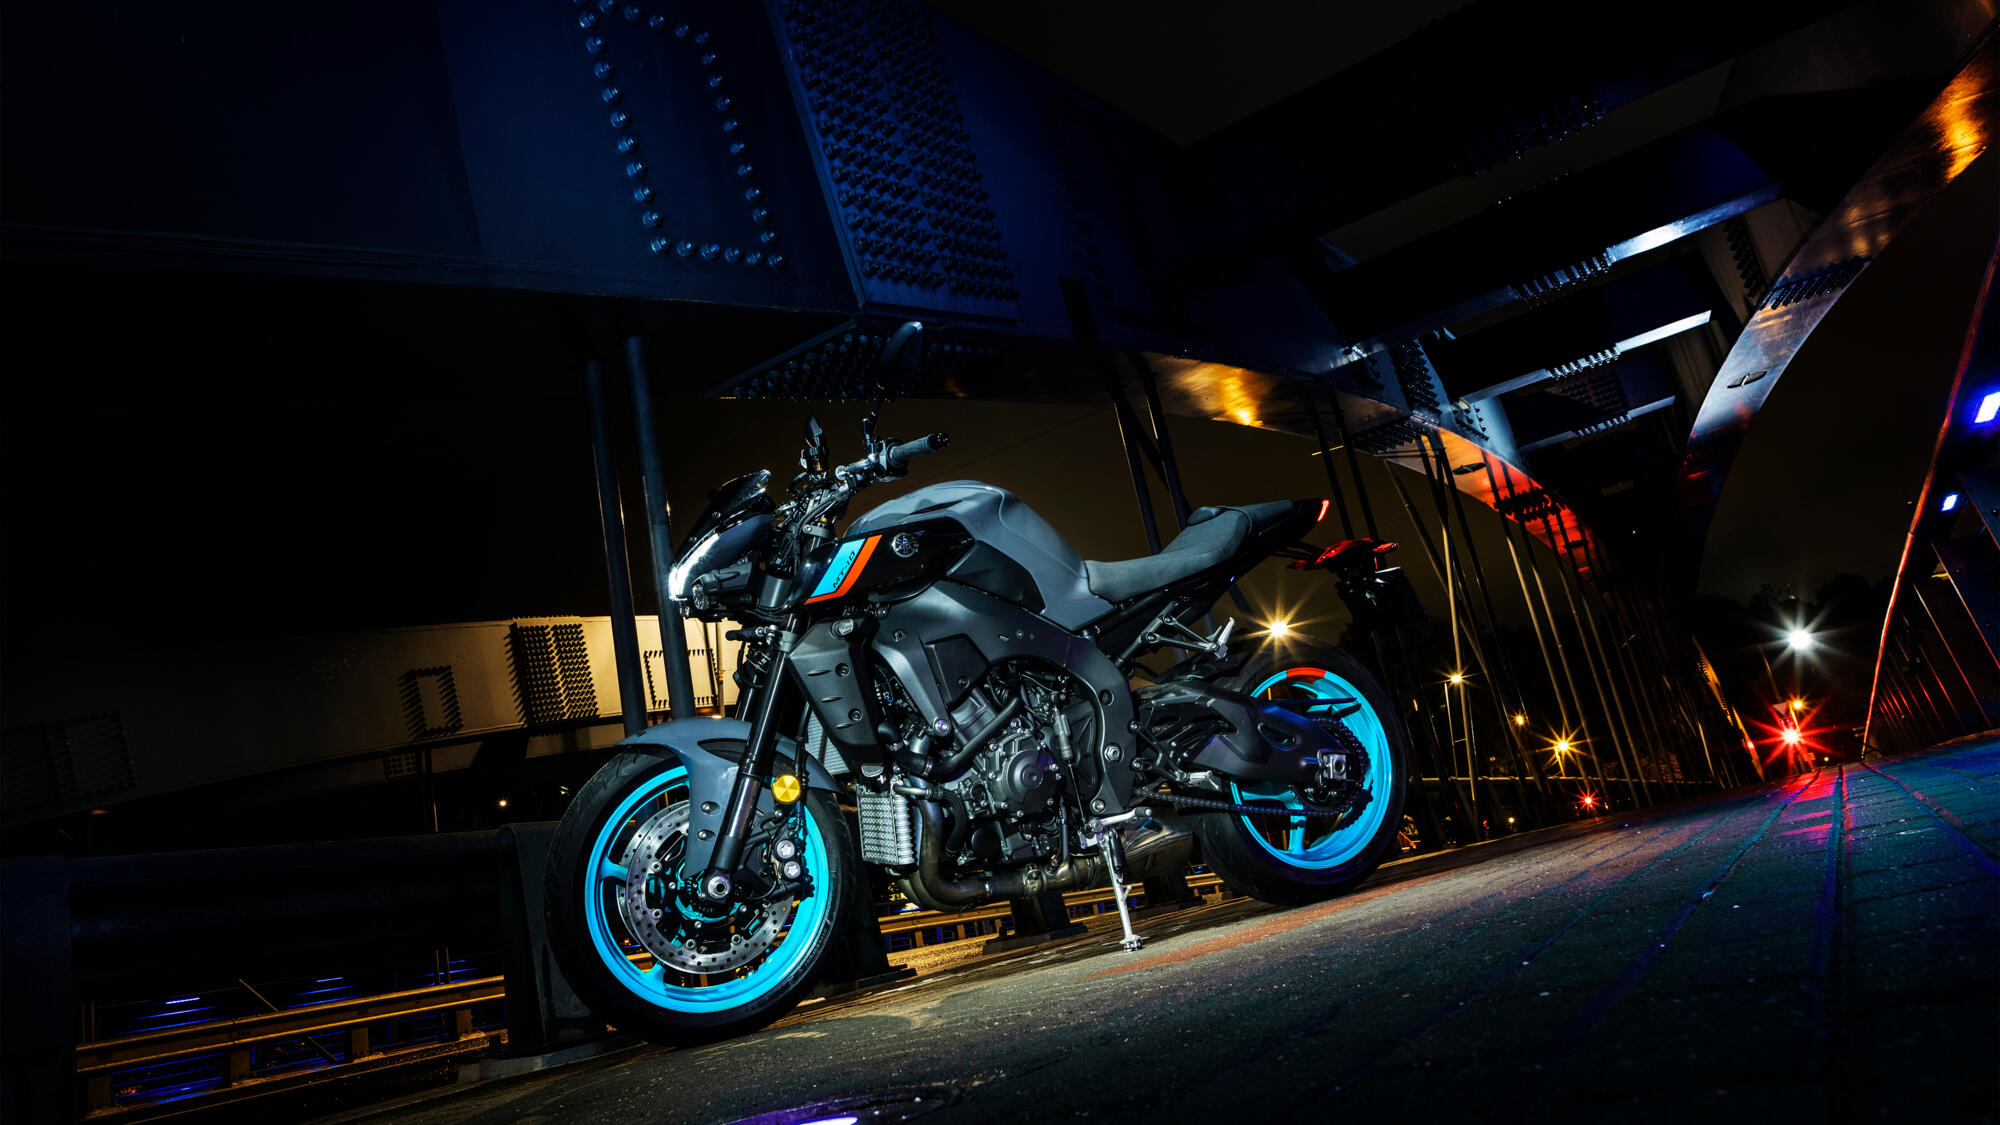 Yamahas flagship naked streetfighter gets a makeover